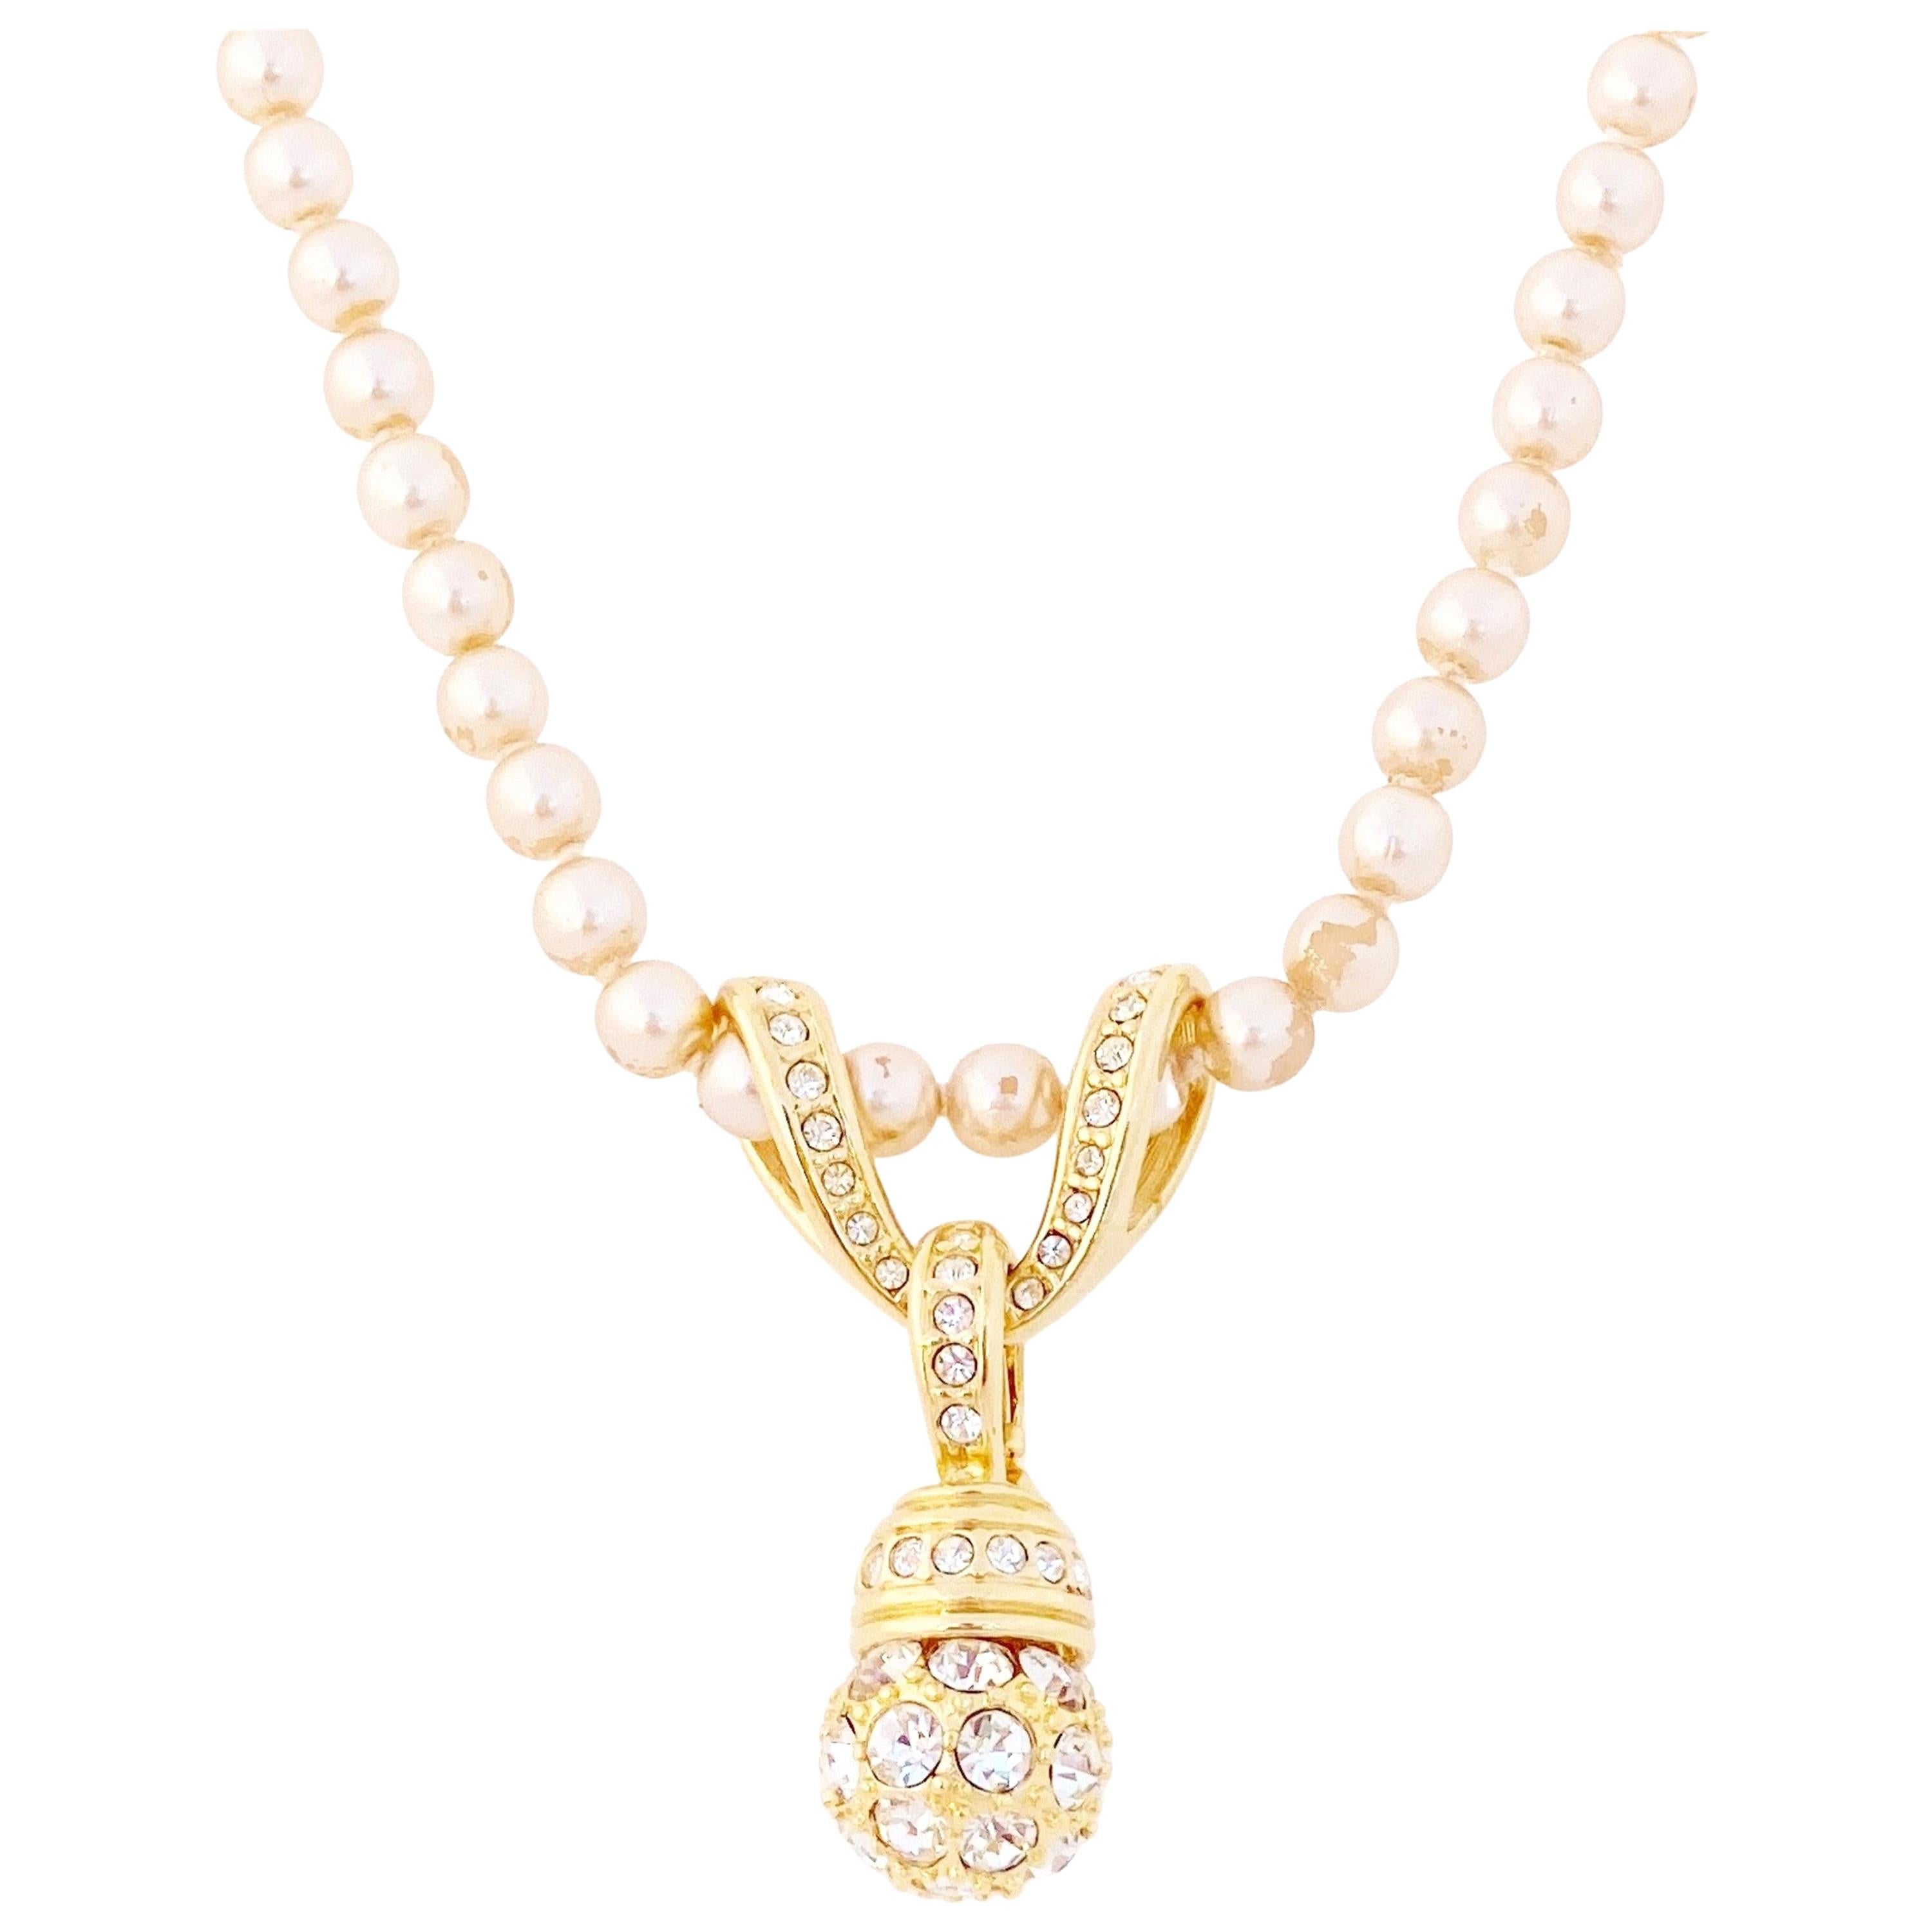 27" Champagne Pearl Necklace w Crystal Encrusted Pendant By Nolan Miller, 1980s For Sale